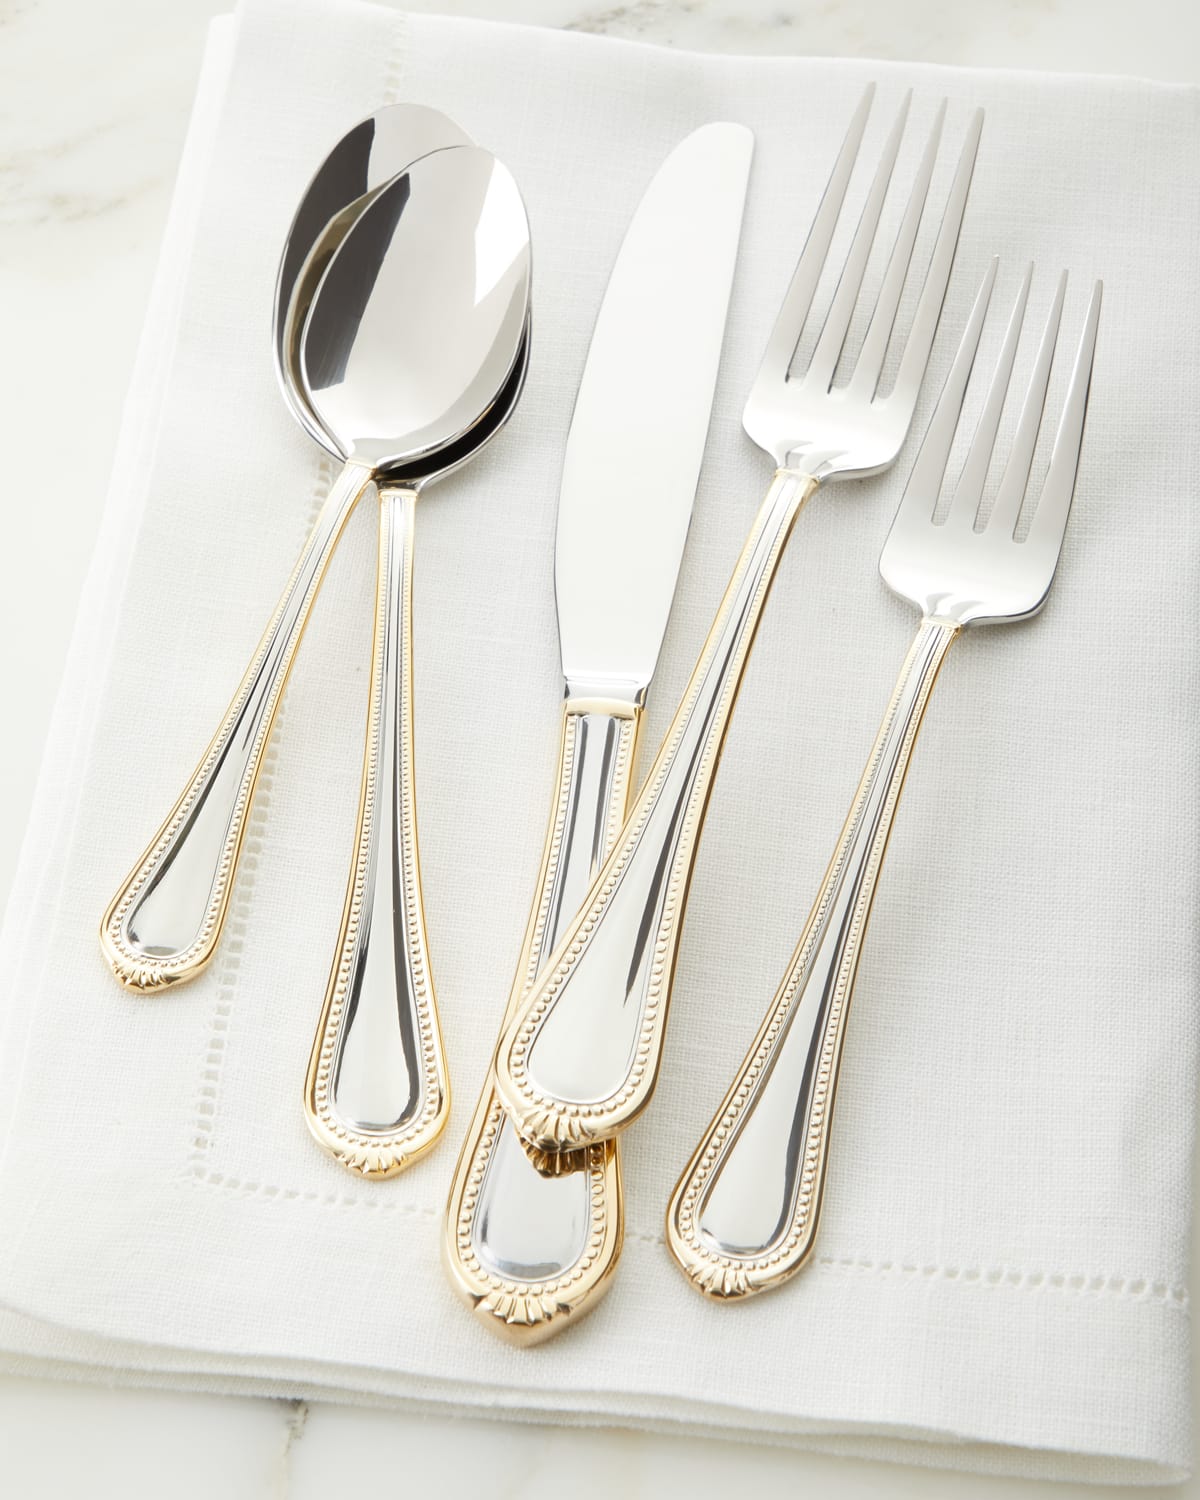 Mikasa Regent Bead Gold 65 PC 24k /& Stainless Steel Flatware Set Service for 12 for sale online